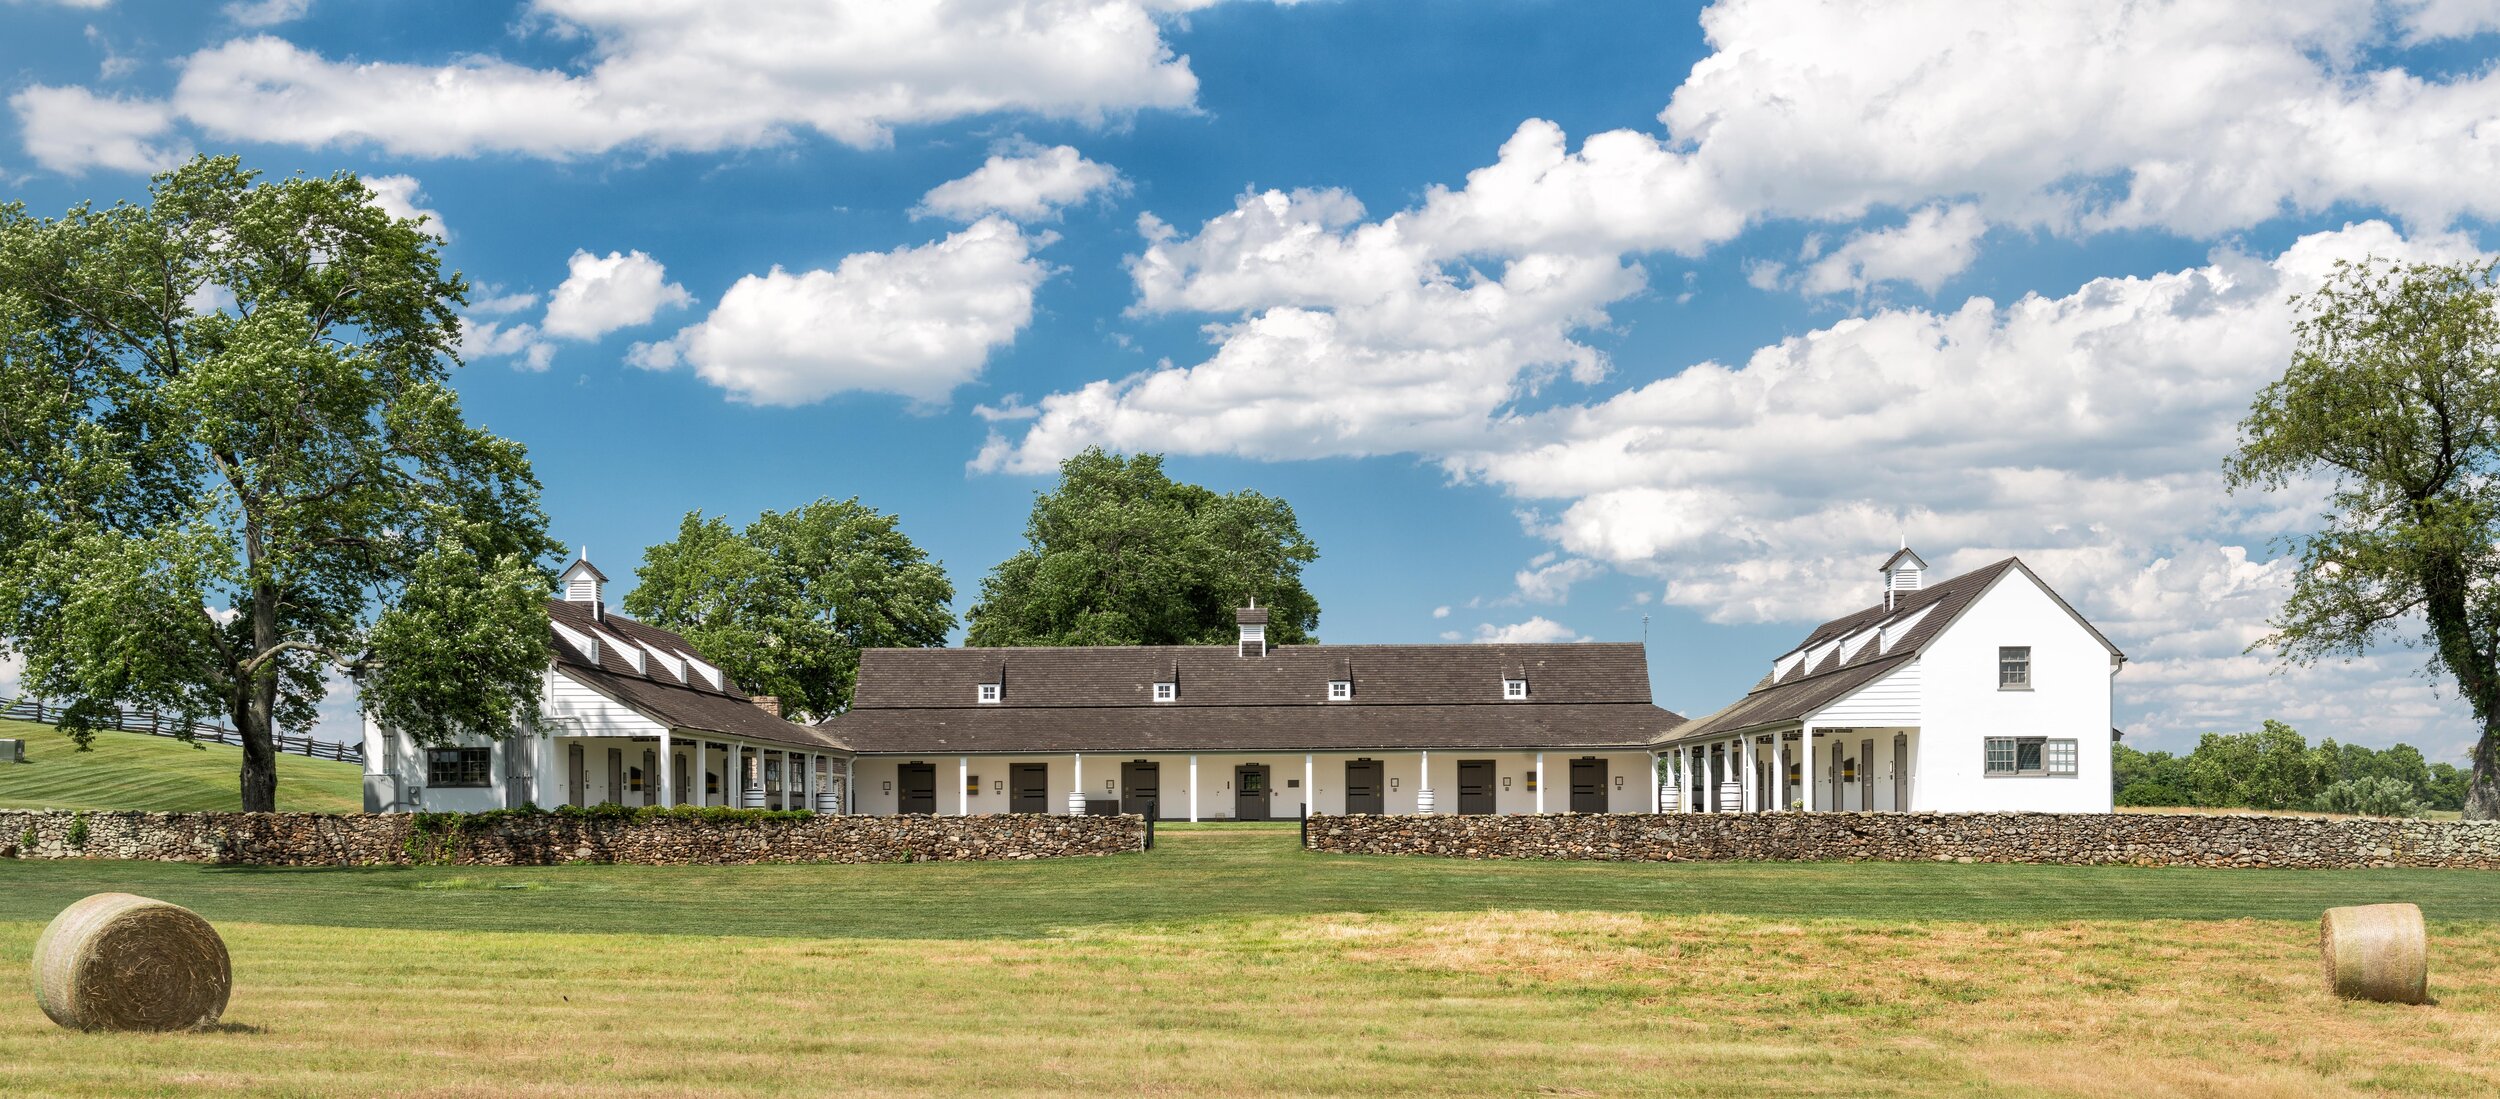  Paul Mellon’s Rokeby Farms have a storied history in the equestrian world. This building, the Broodmare Barn, is where Mr. Mellon bred many of his award-winning Thoroughbreds. The use of the Broodmare Barn for equestrian purposes was scaled back in 